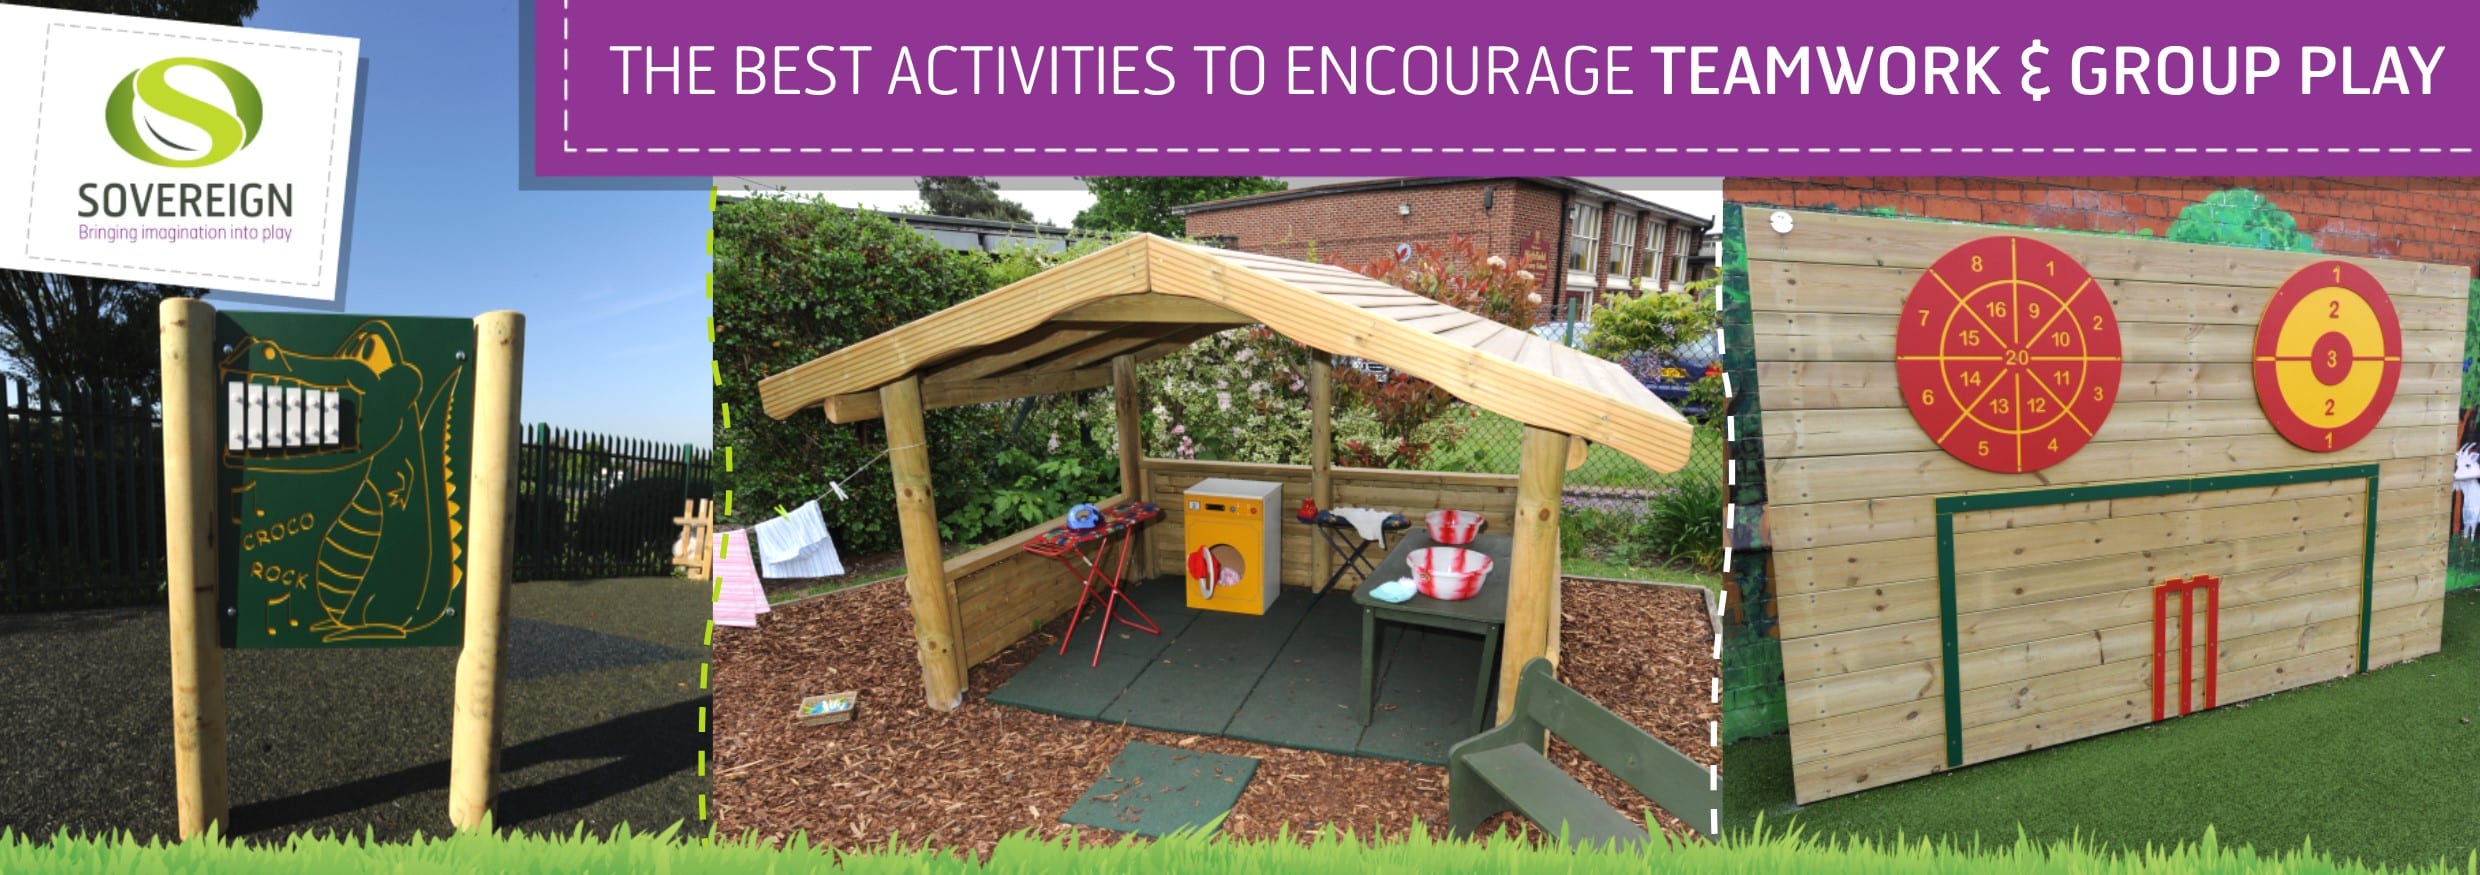 The Best Play Activities to Encourage Teamwork and Group Play